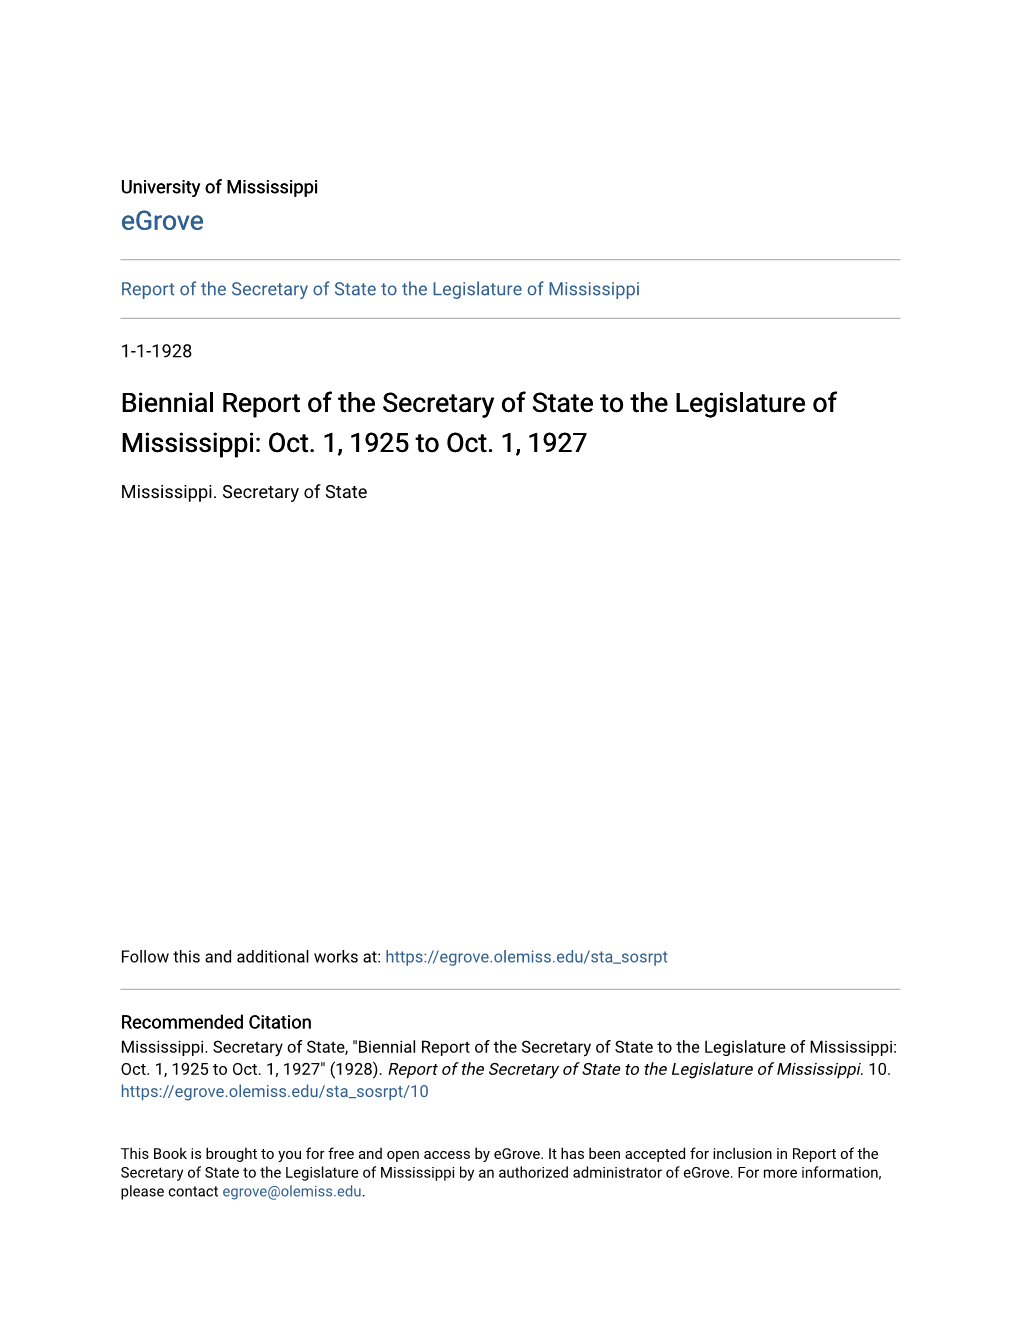 Biennial Report of the Secretary of State to the Legislature of Mississippi: Oct